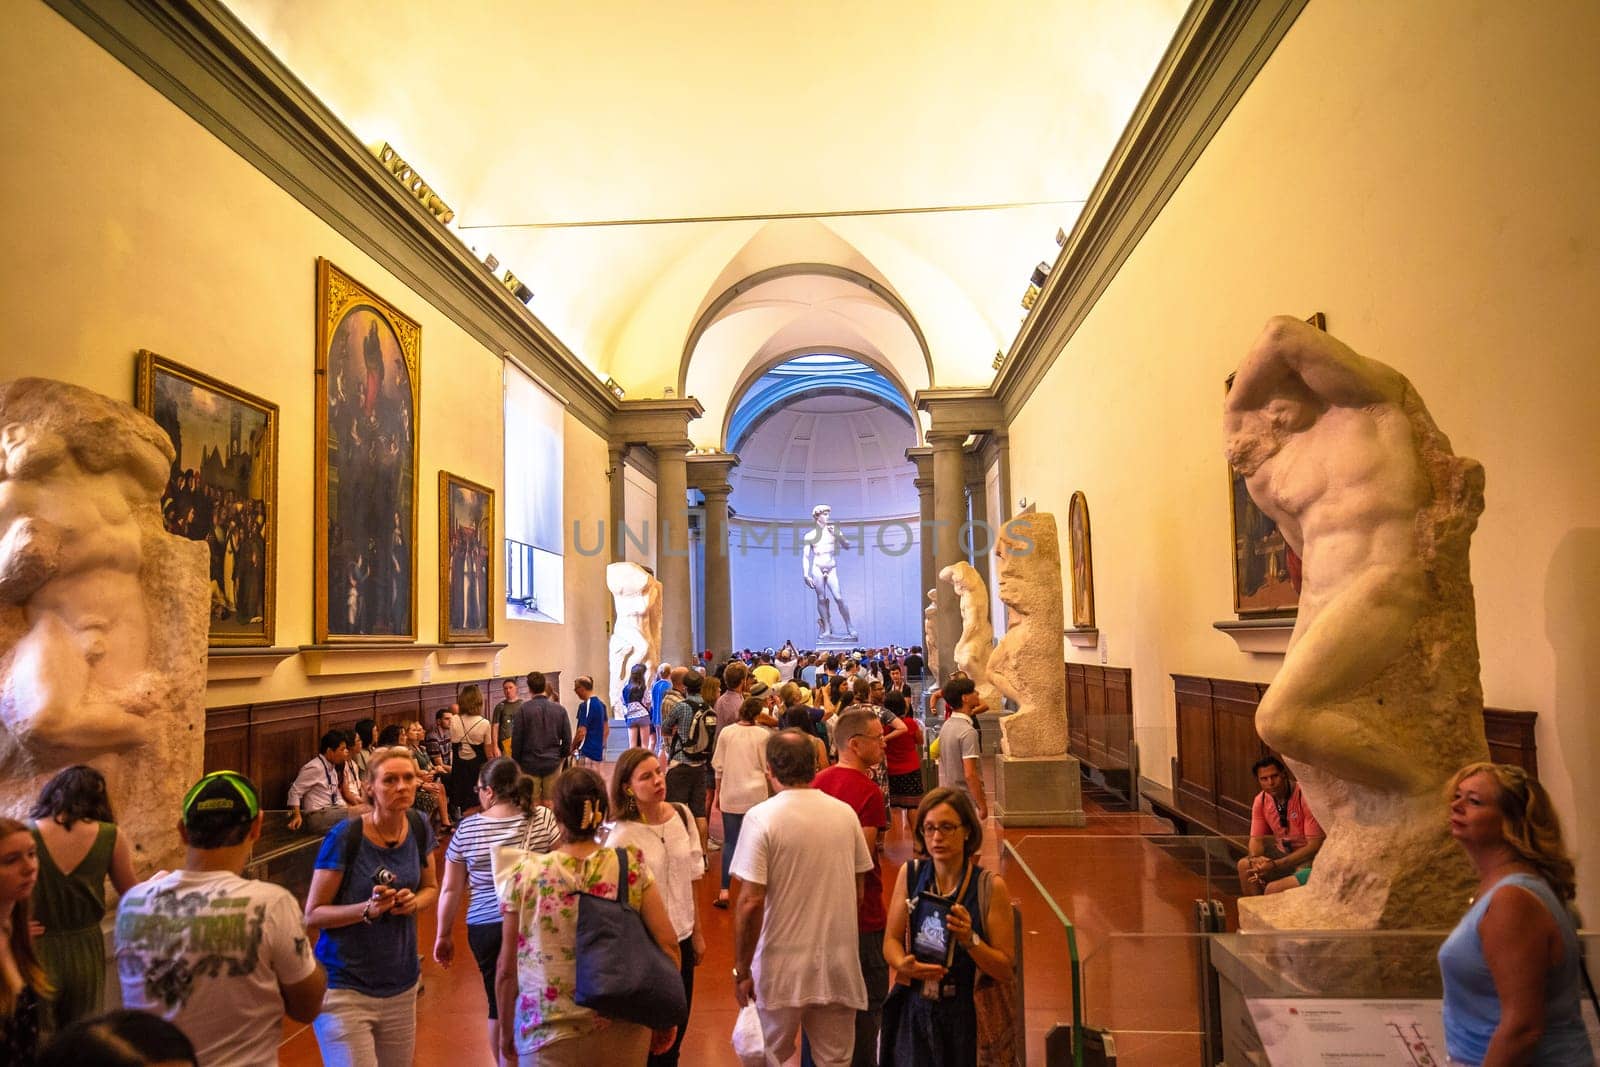 Florence Accademia and The Statue of David by xbrchx